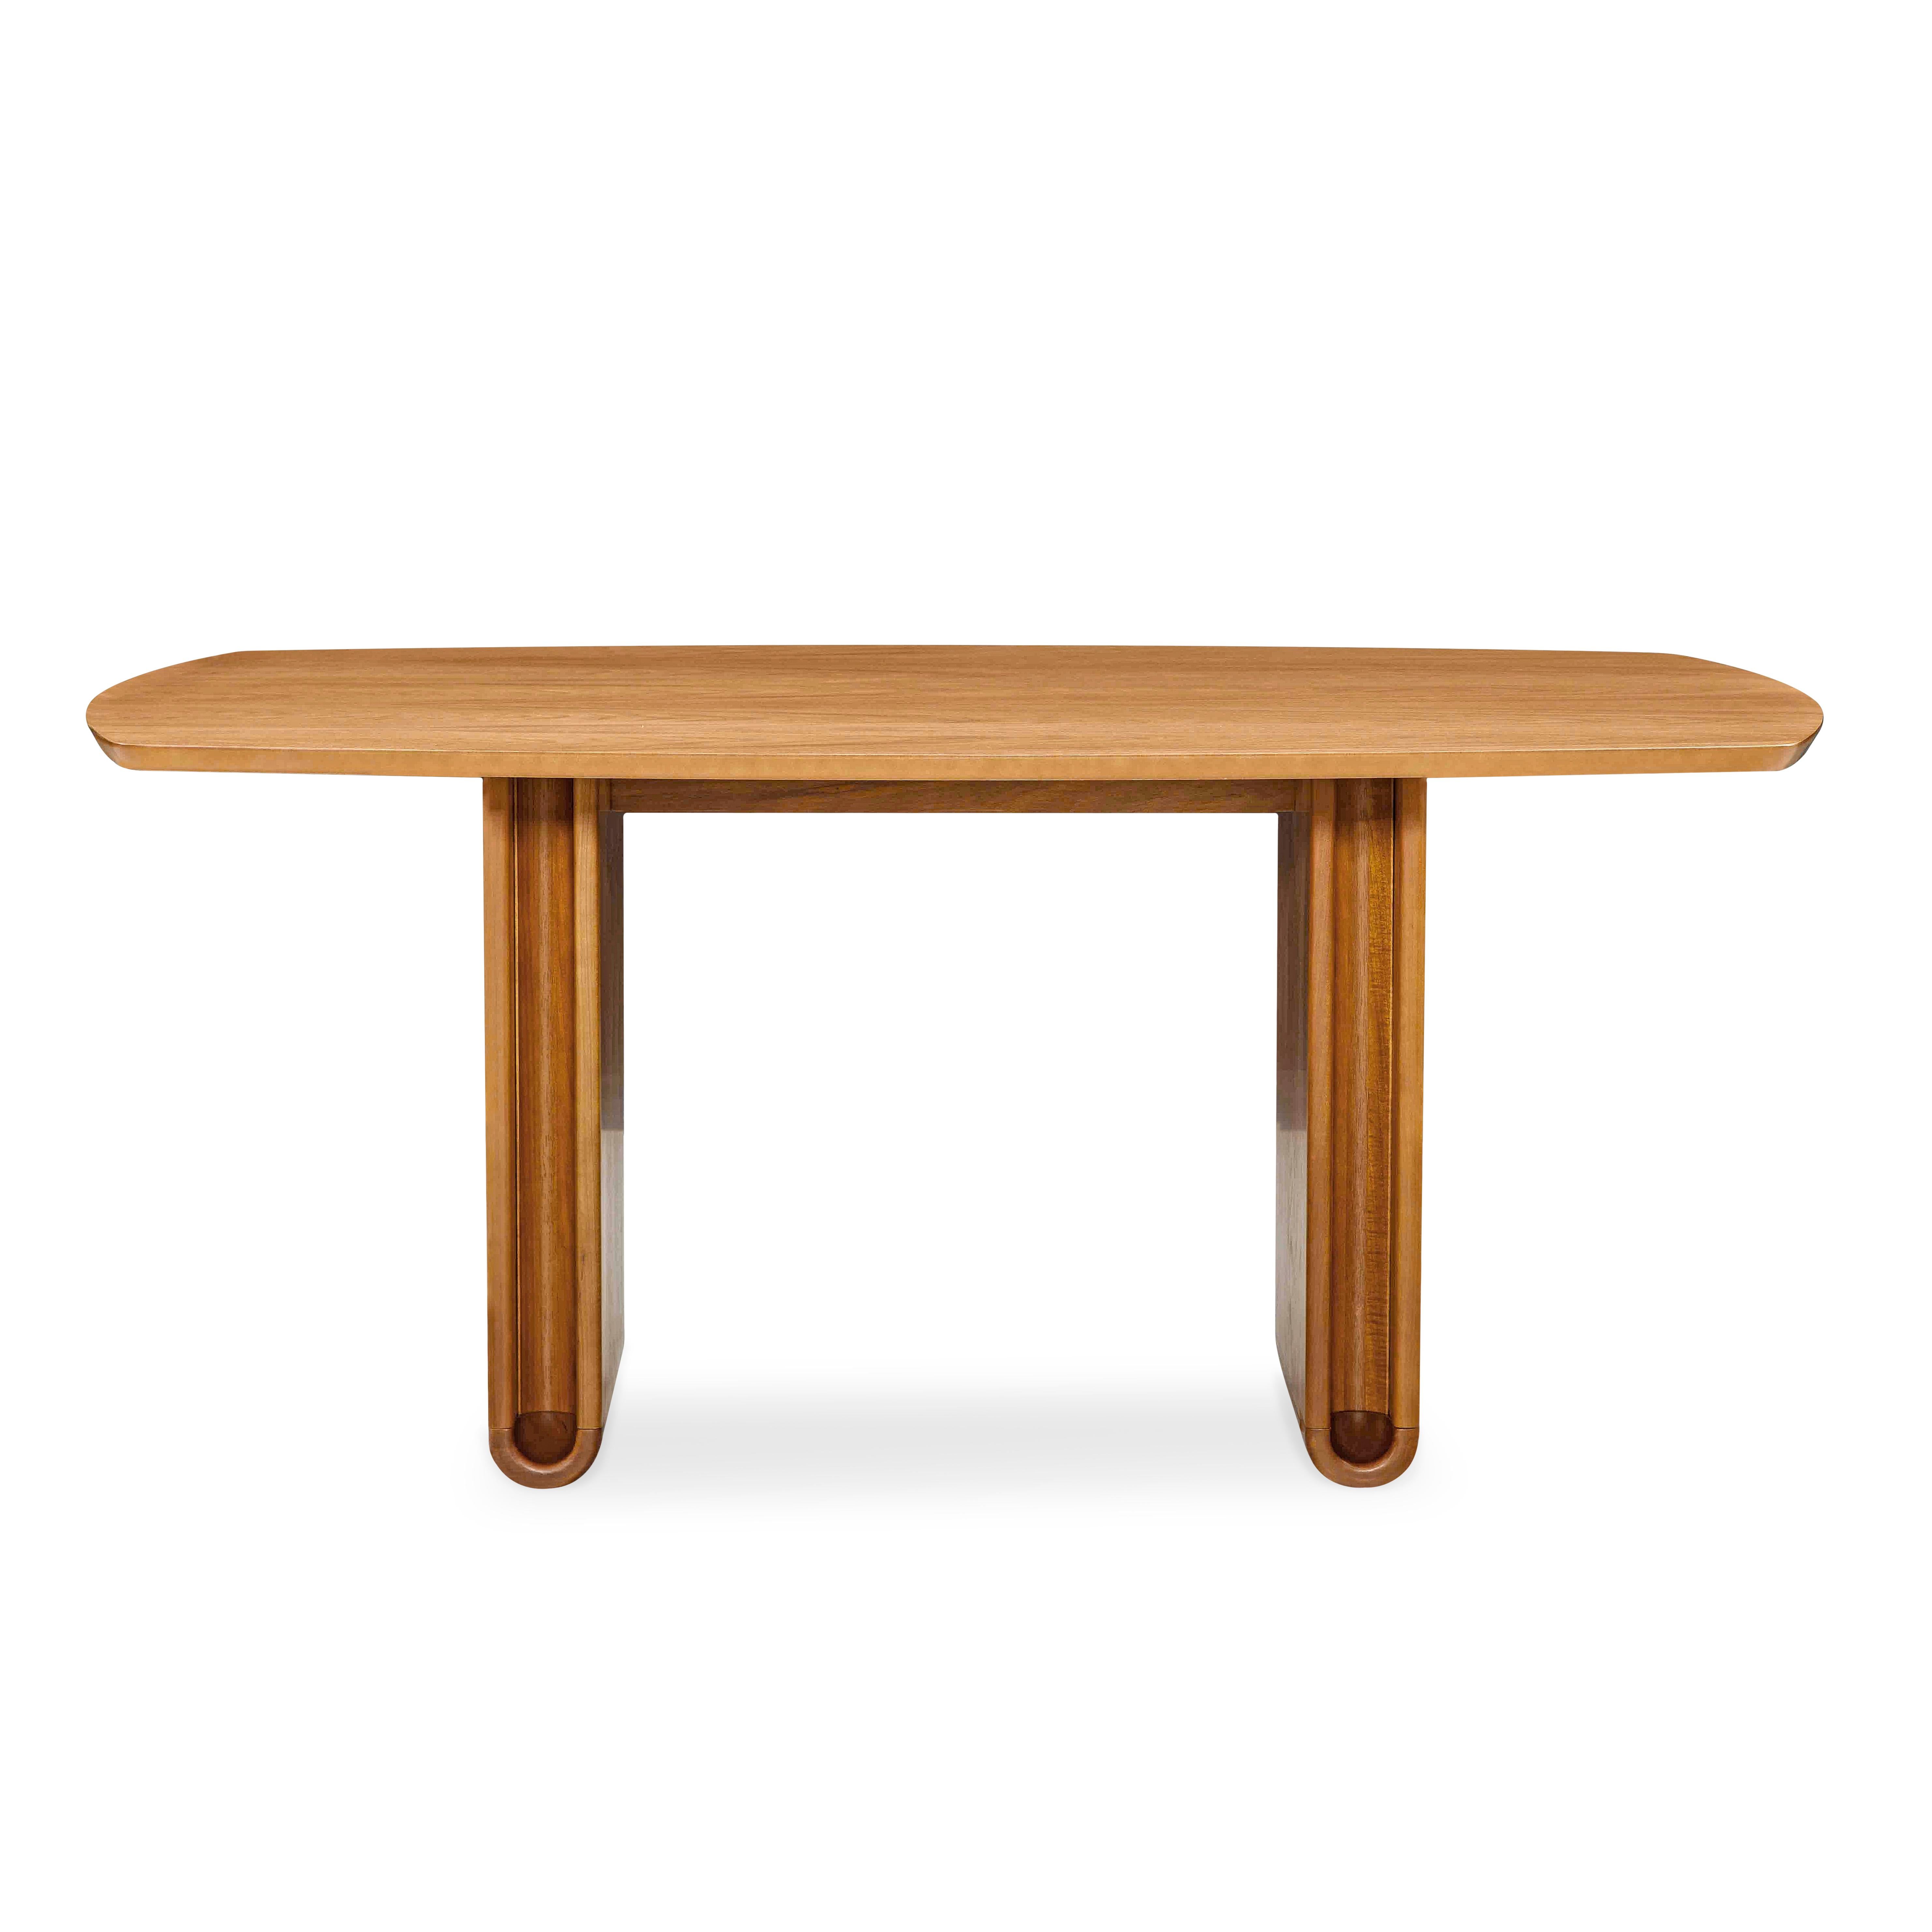 Neon Dining Table in Almond Oak Wood Finish 68'' For Sale 2